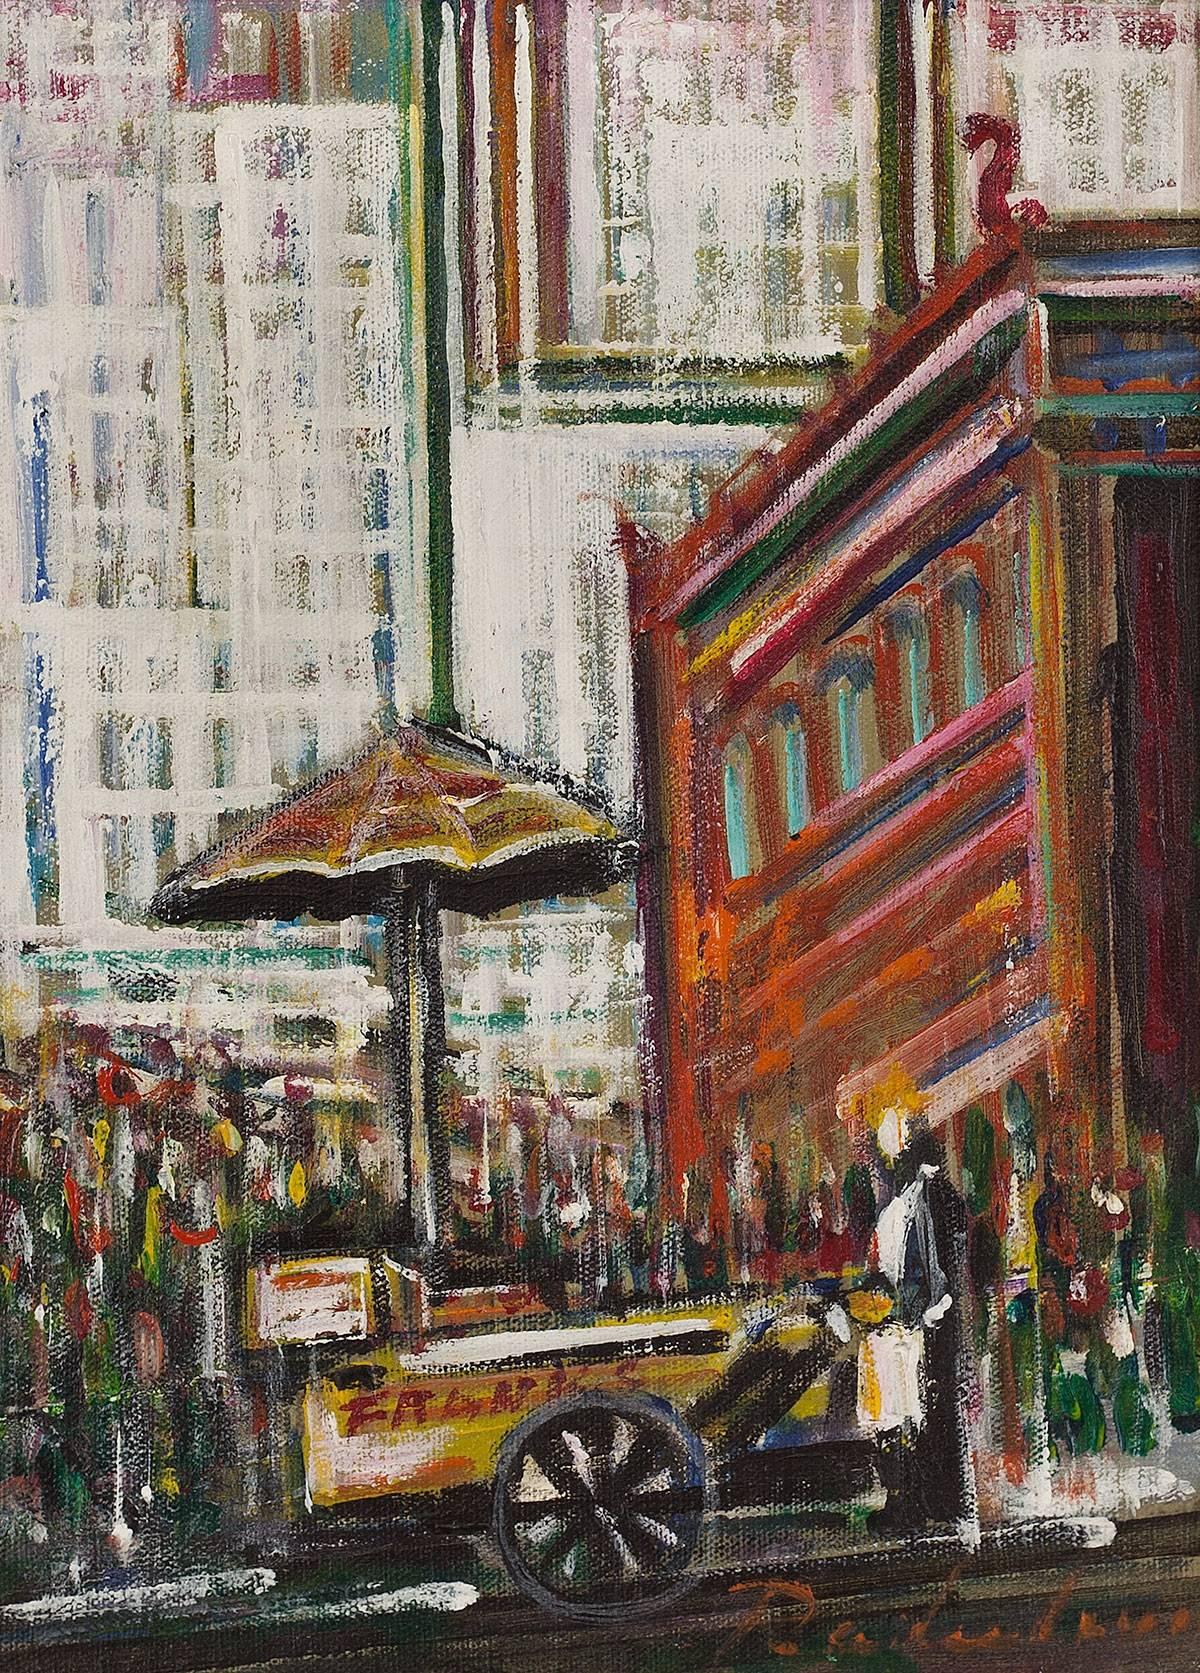 Hot Dog Vendor, Manhattan, NYC Street Scene - Painting by Unknown